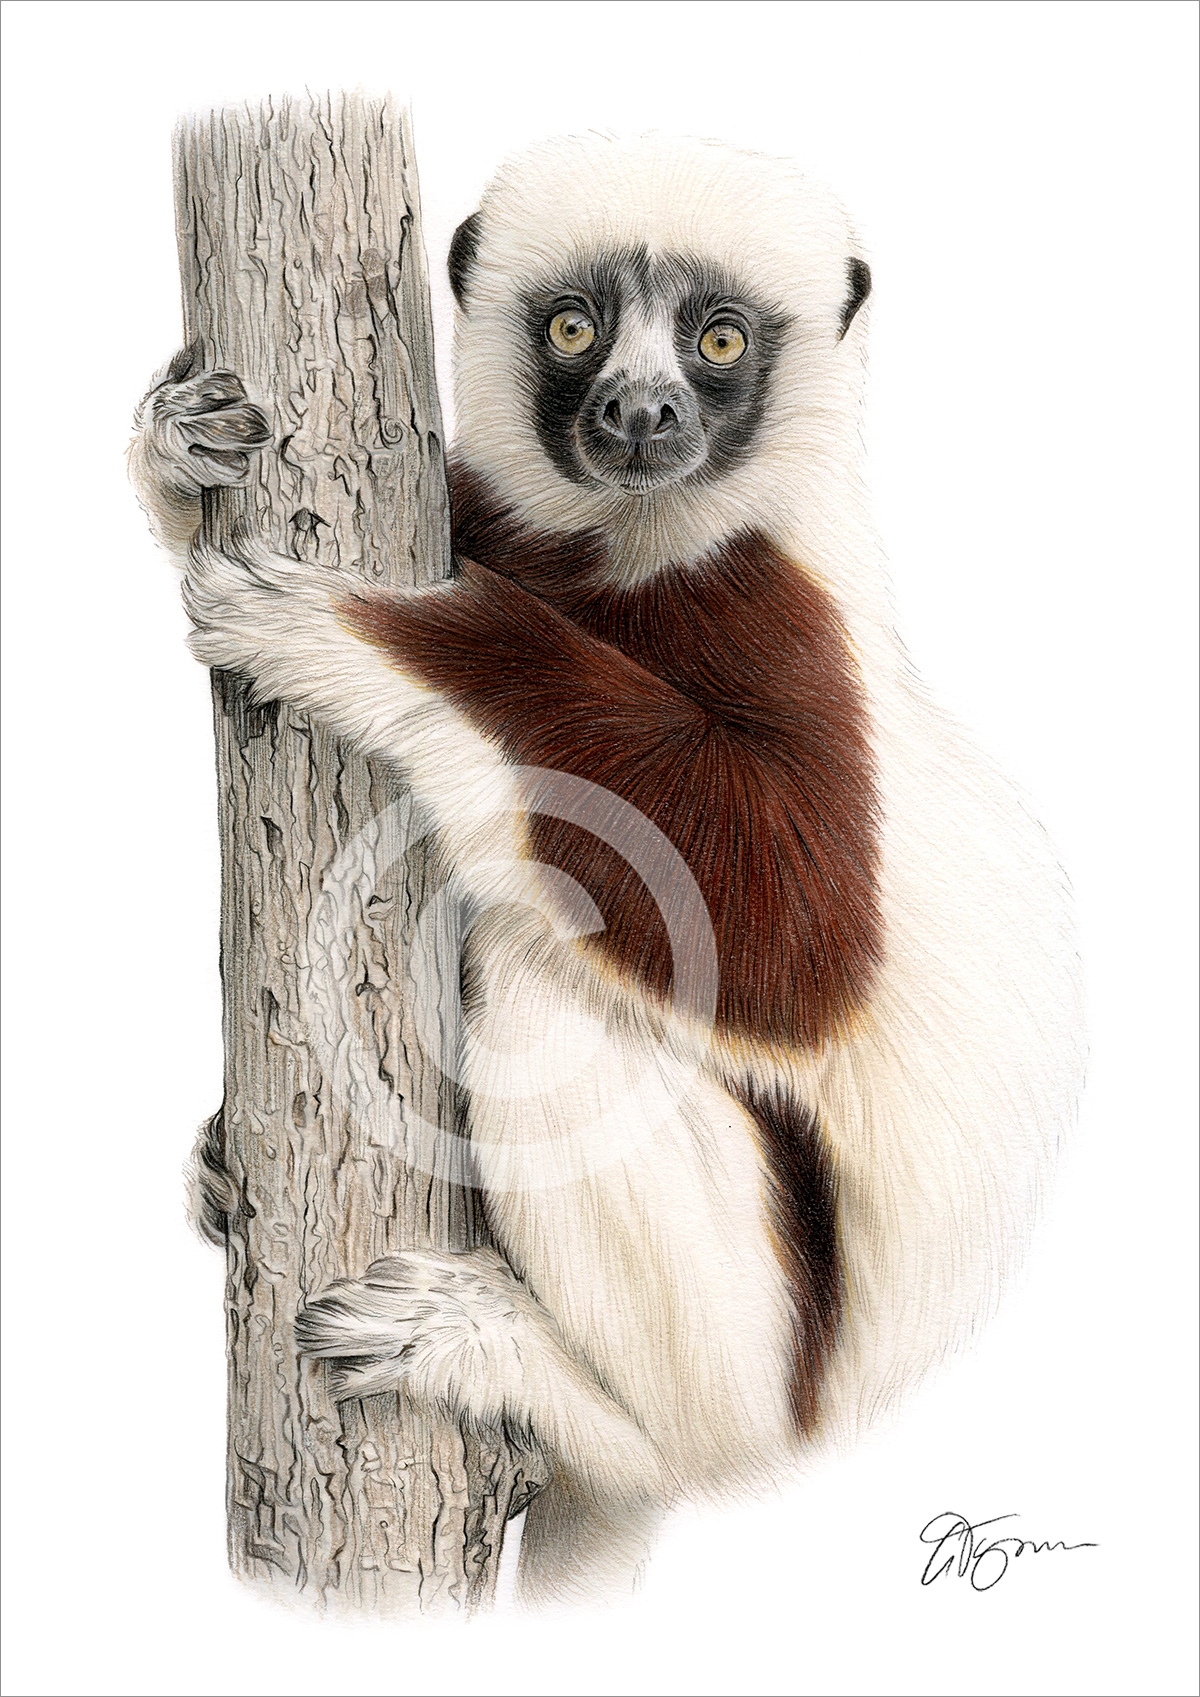 Colour pencil drawing of a sifaka by artist Gary Tymon